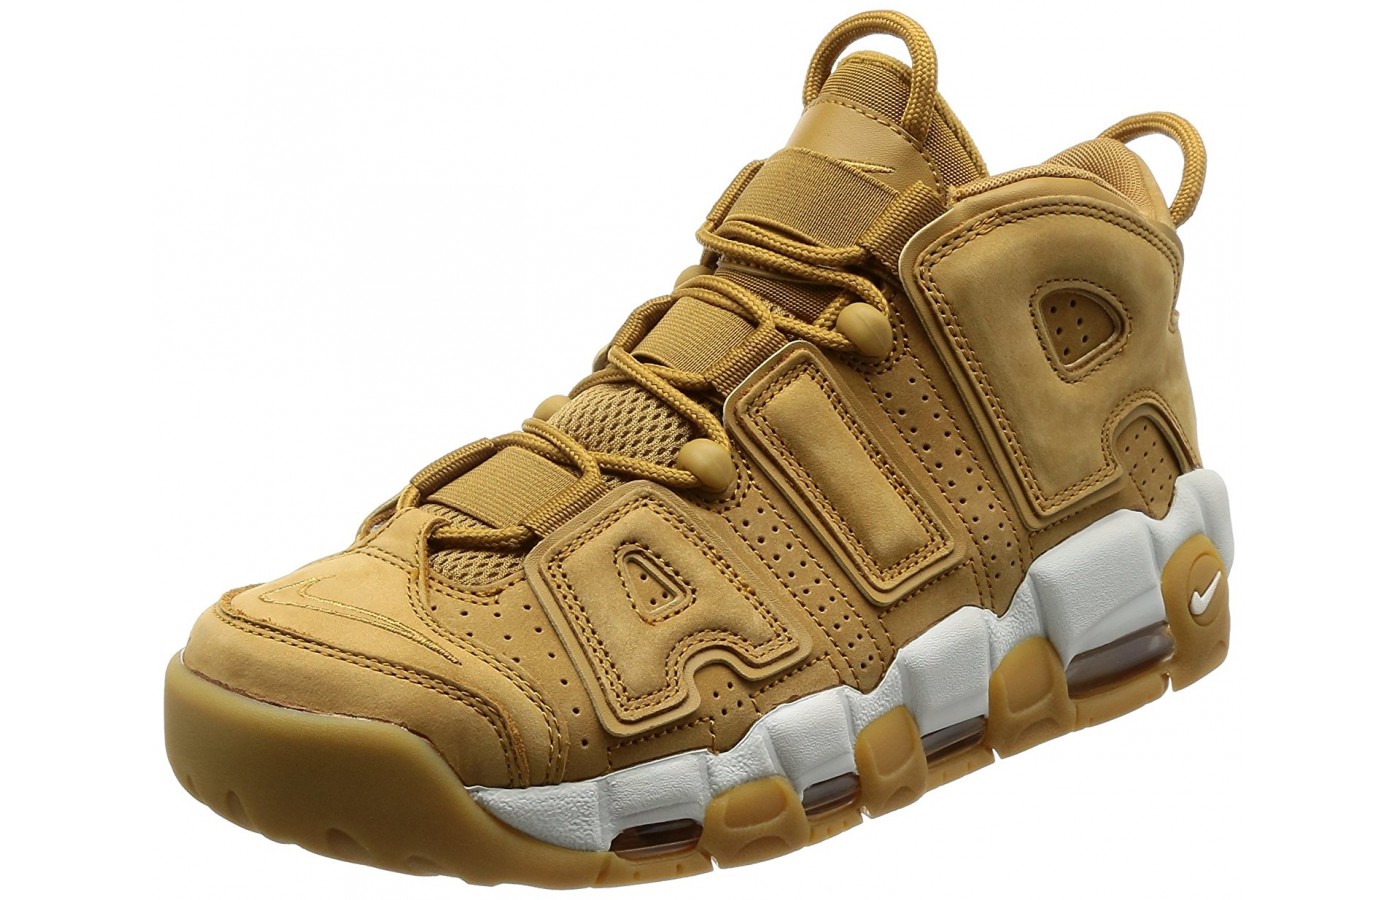 Nike Air More Uptempo Reviewed \u0026 Tested 